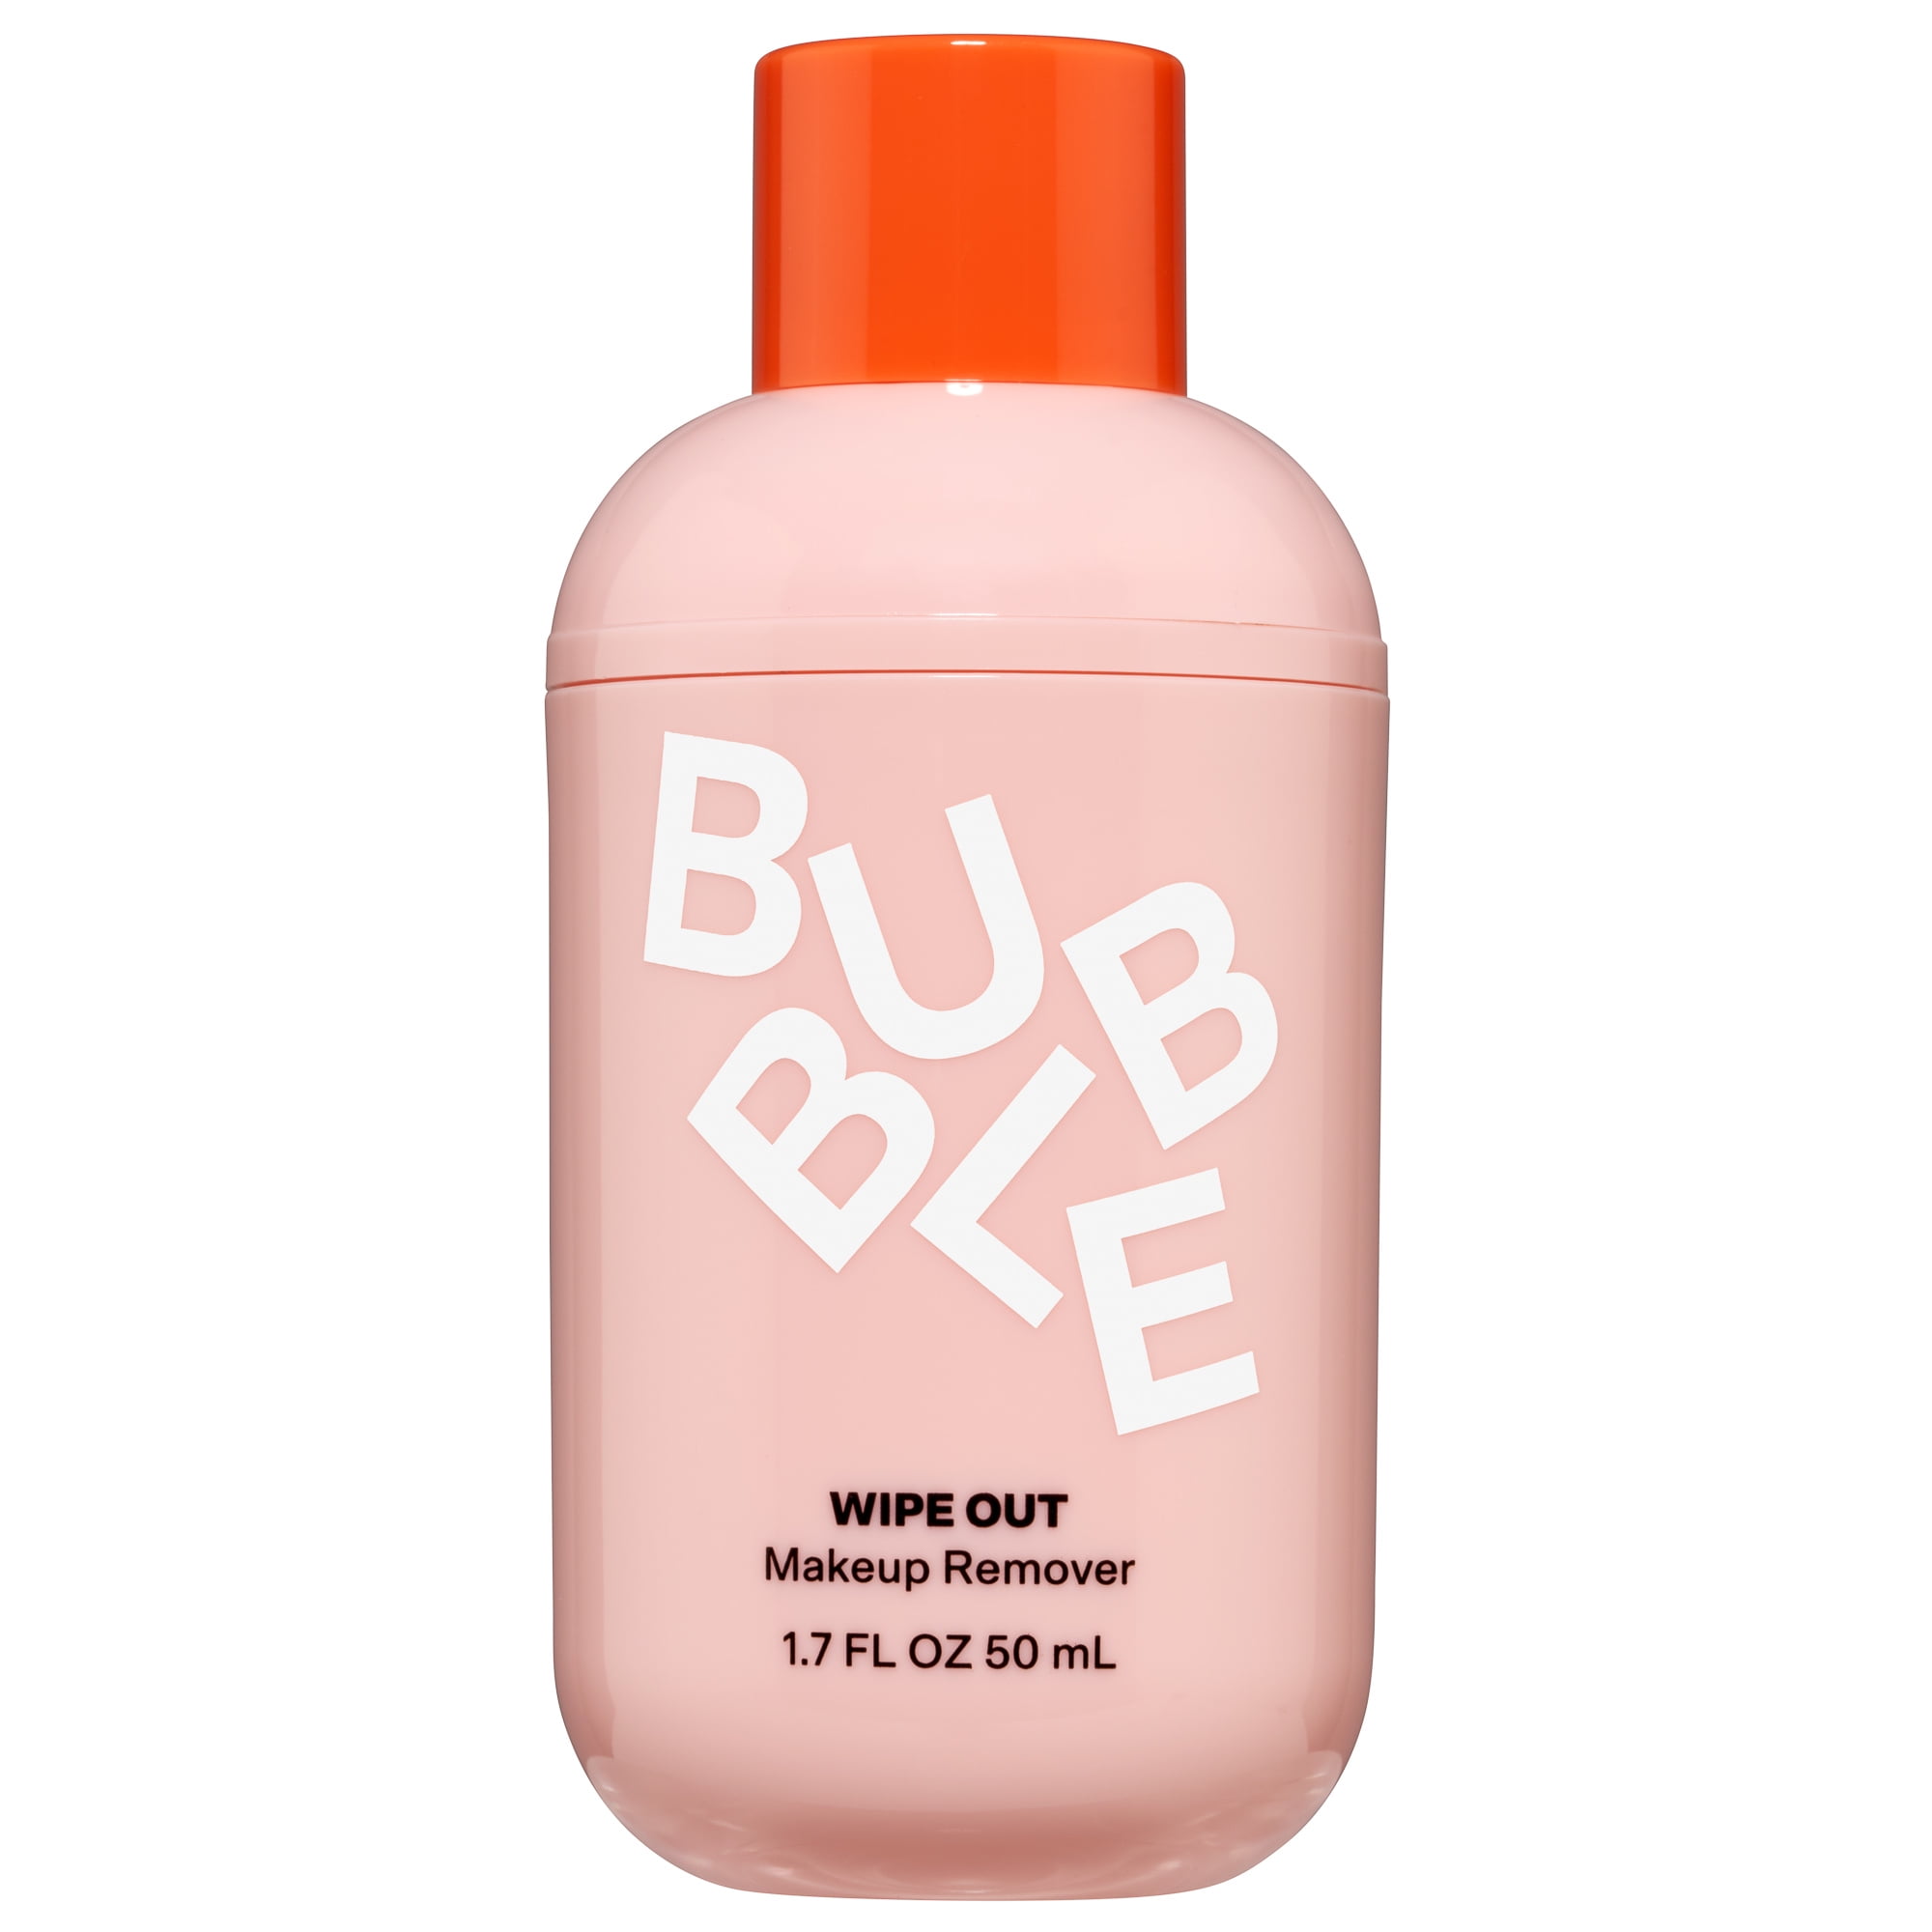  Bubble Skincare Wipe Out Makeup Remover, Gentle yet Effective  Makeup Removal, Chickweed Extract Rich in Vitamins and Antioxidants,  Fragrance-Free, 50ml : Beauty & Personal Care